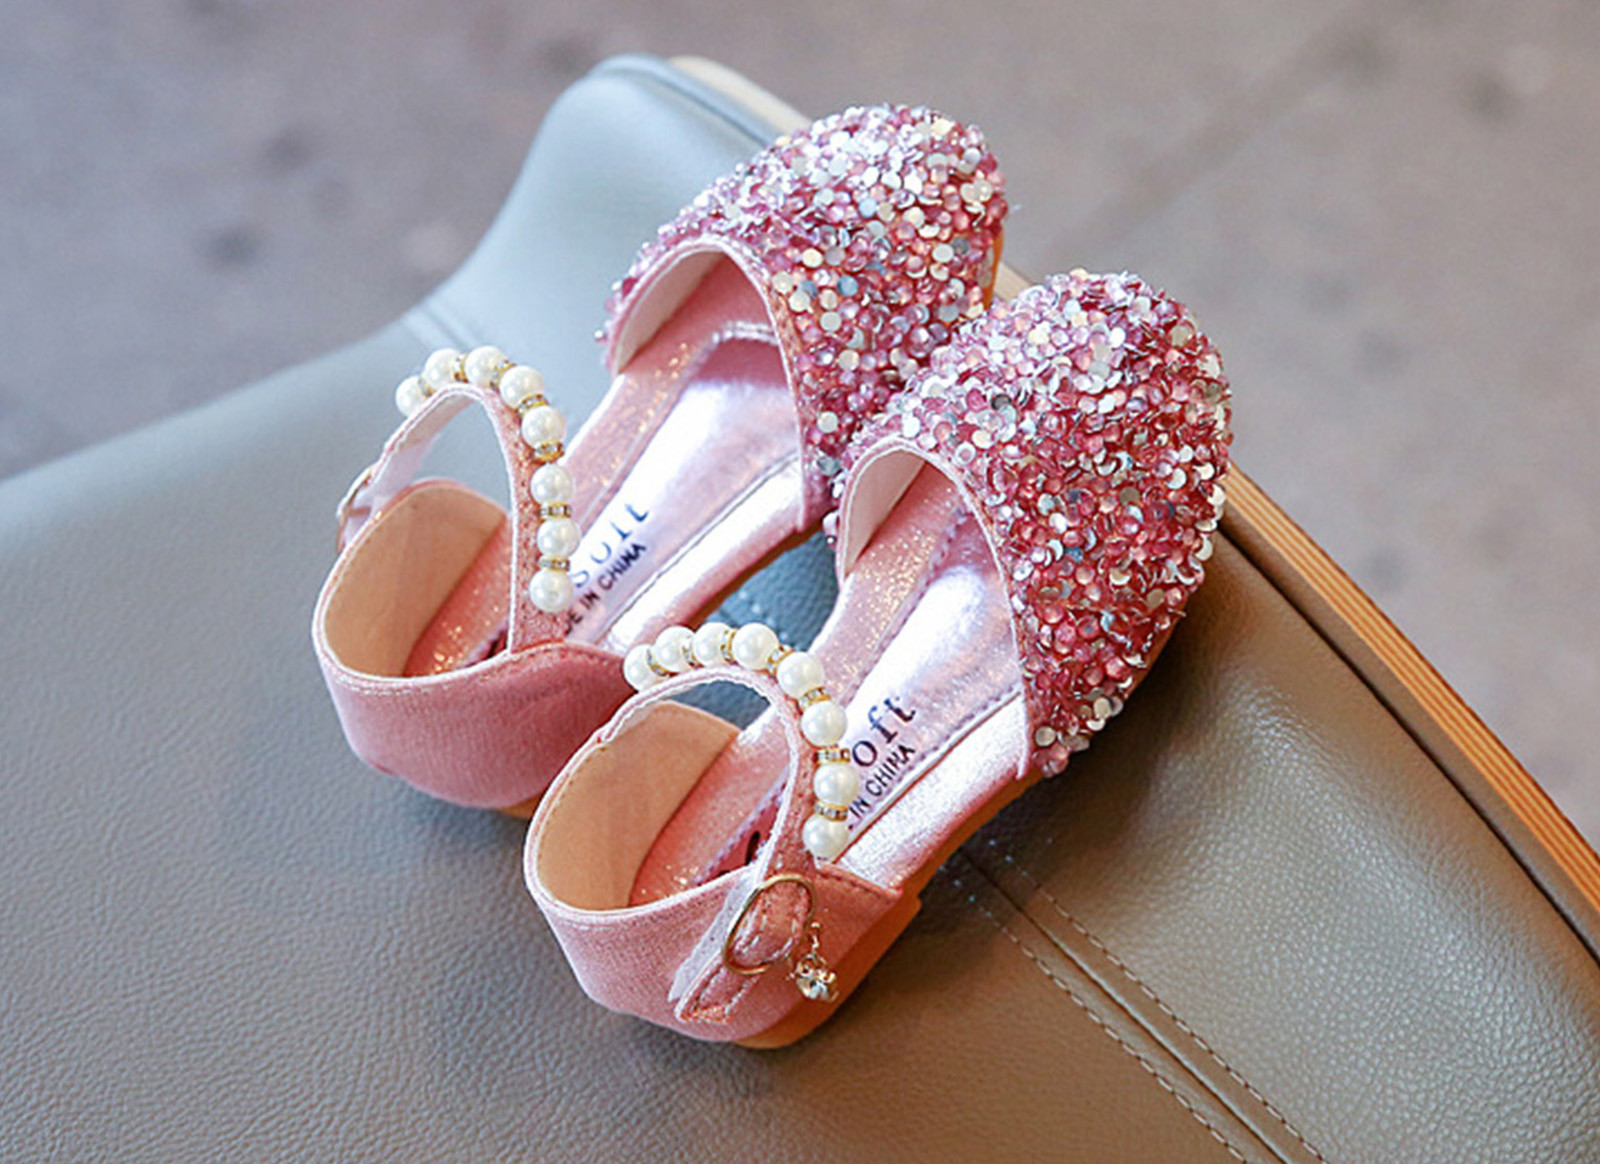 Cathalem Toddler Water Sandals Princess Pumps Dance Shoes Low Heels Rhinestone Sequins Girls Glitter Toddler Girls Jelly Sandals Sandal Pink 6.5 Years - image 1 of 4